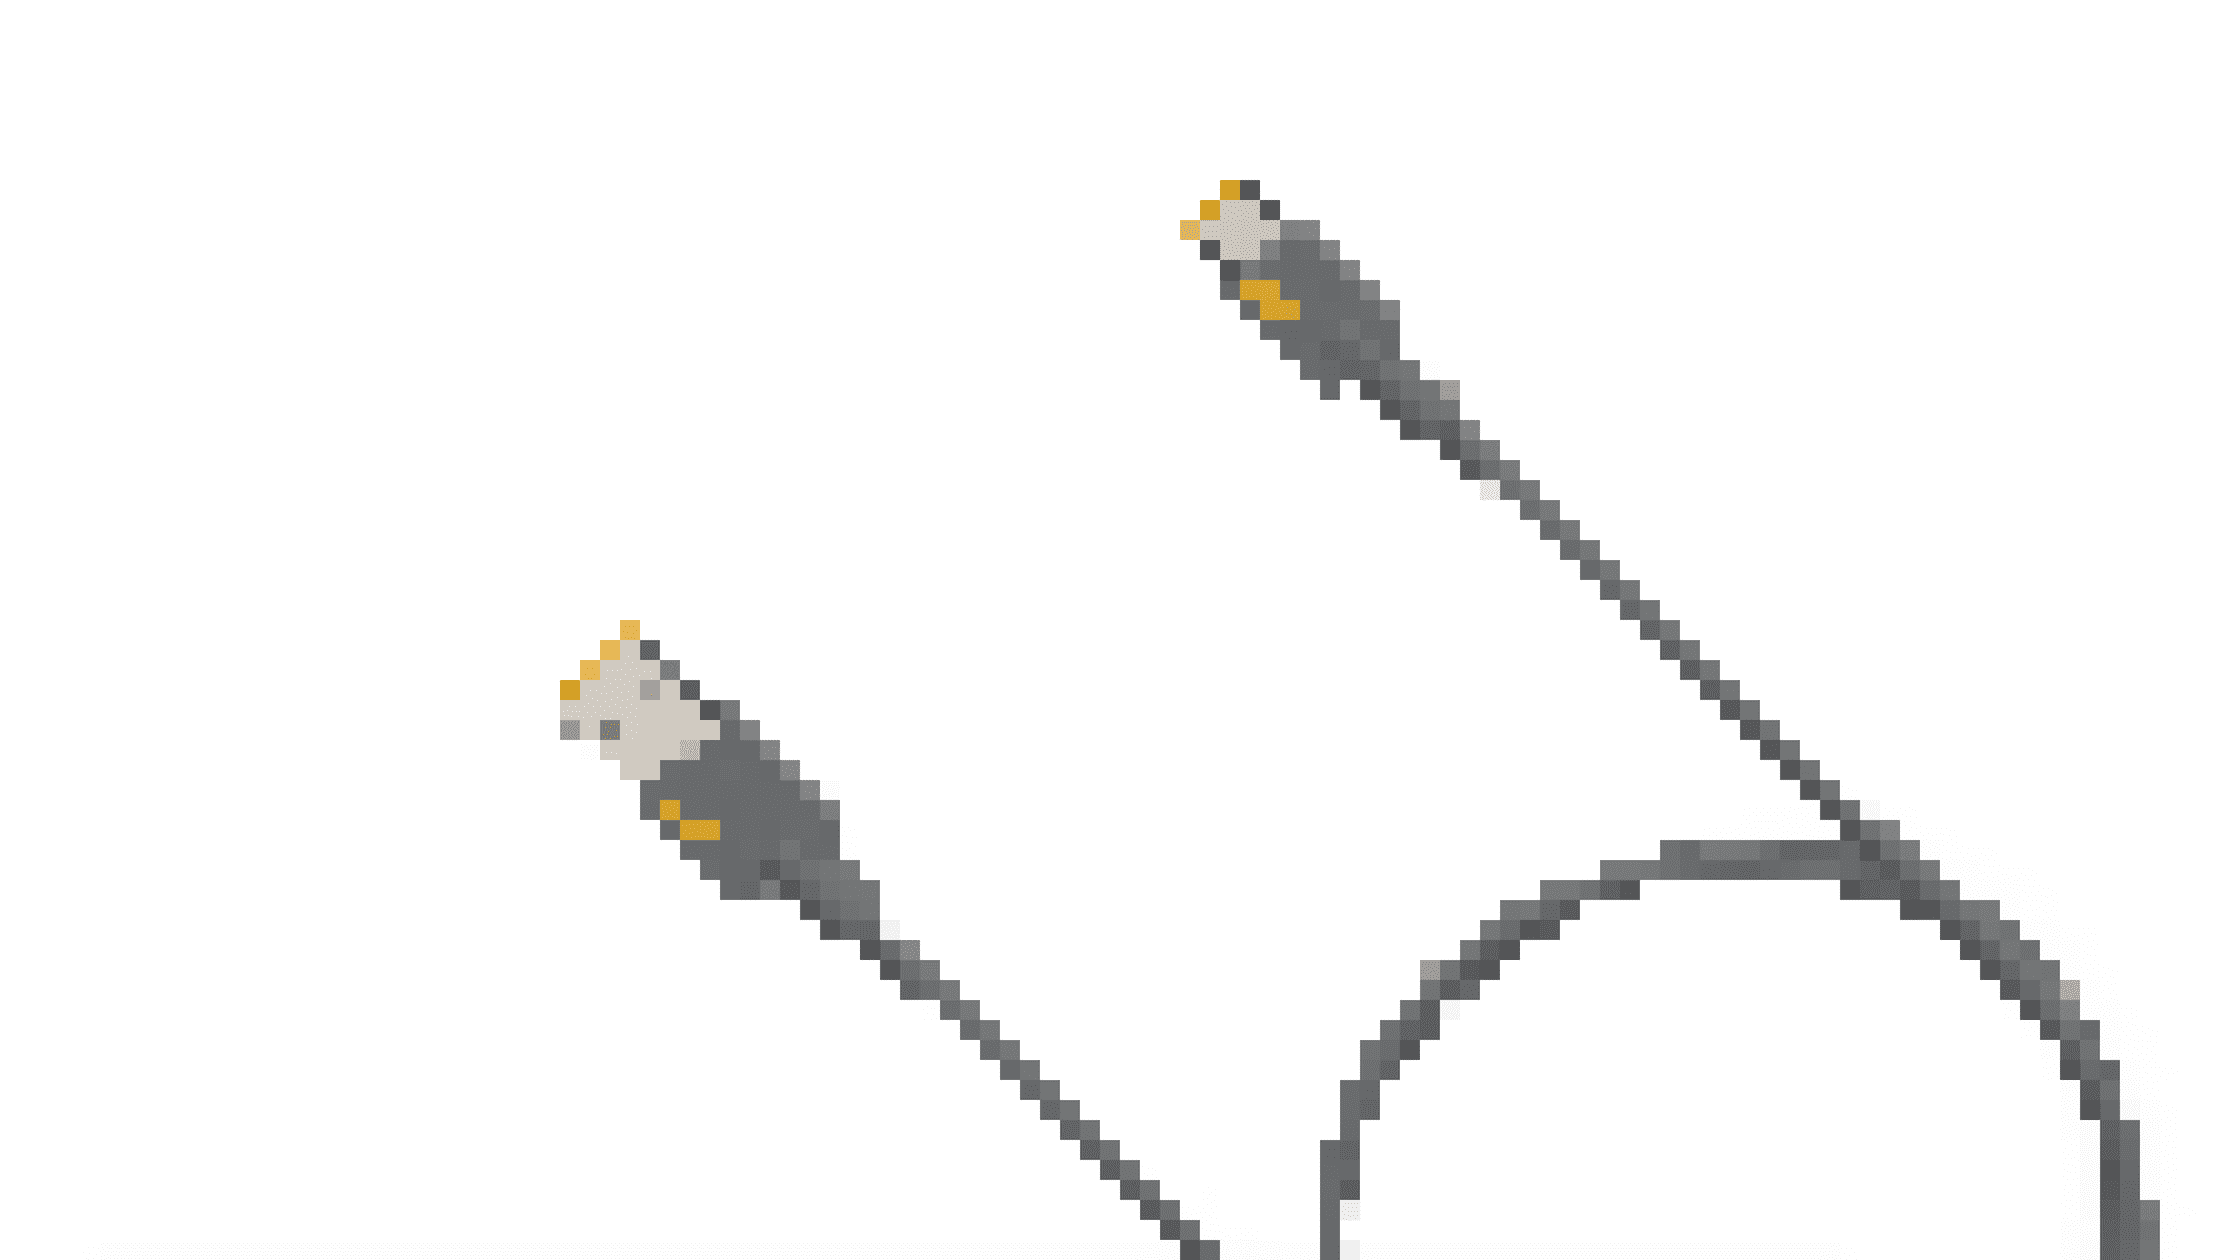 USB-A to USB-C Cable Design and renderfor teenage engineering 2017